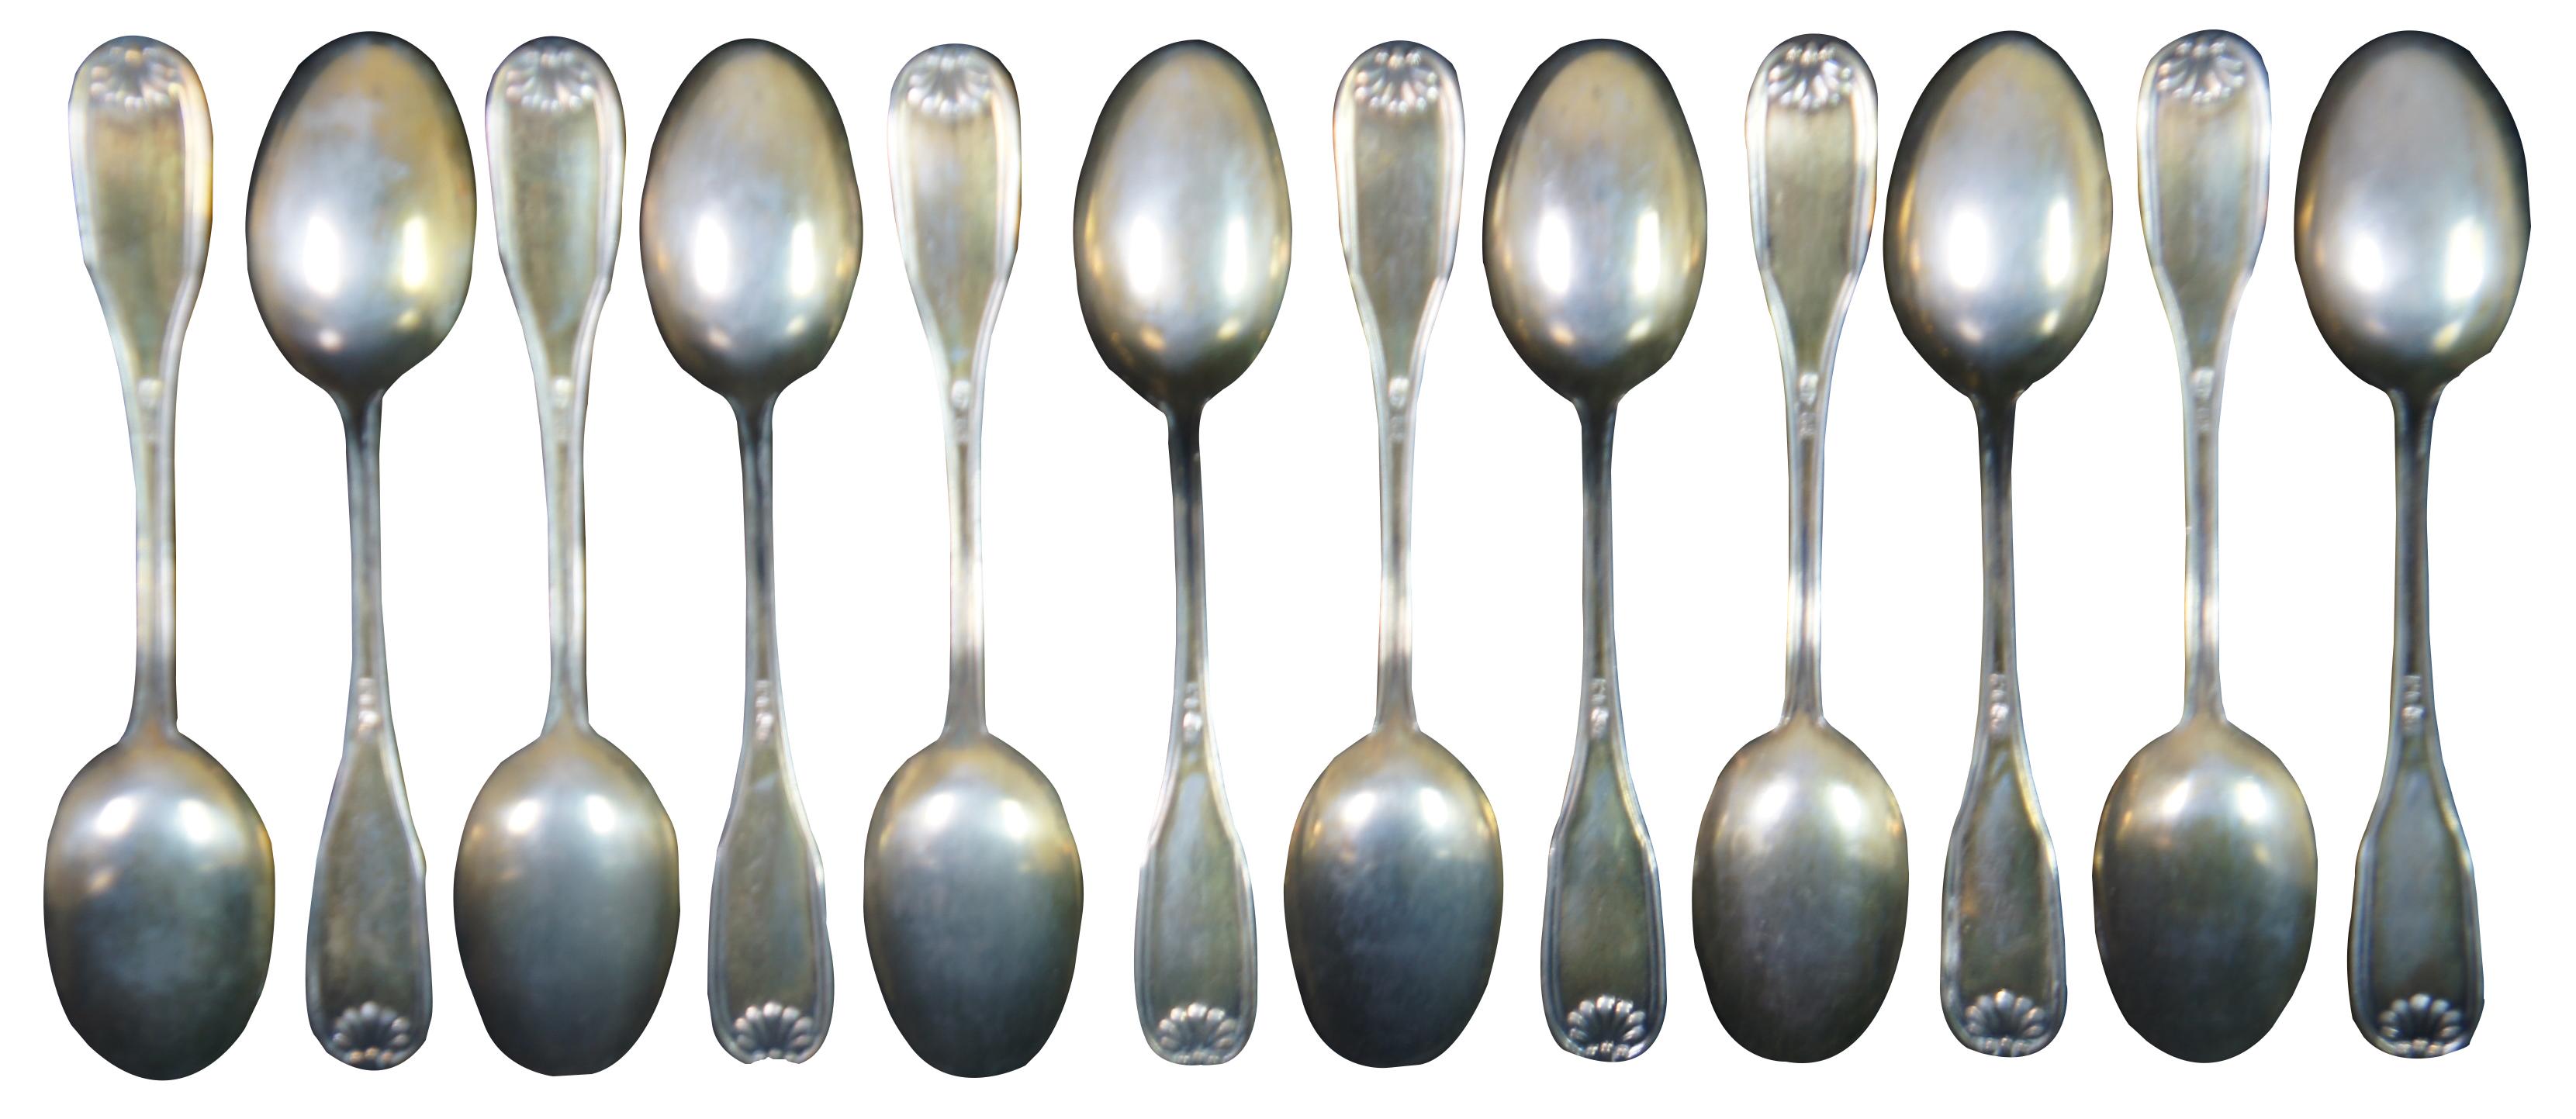 Twelve antique English 800 silver demitasse spoons with scallop shell fiddle, shell and thread pattern.

Measures: 4” x 0.75” / 9g each (length x width).
 